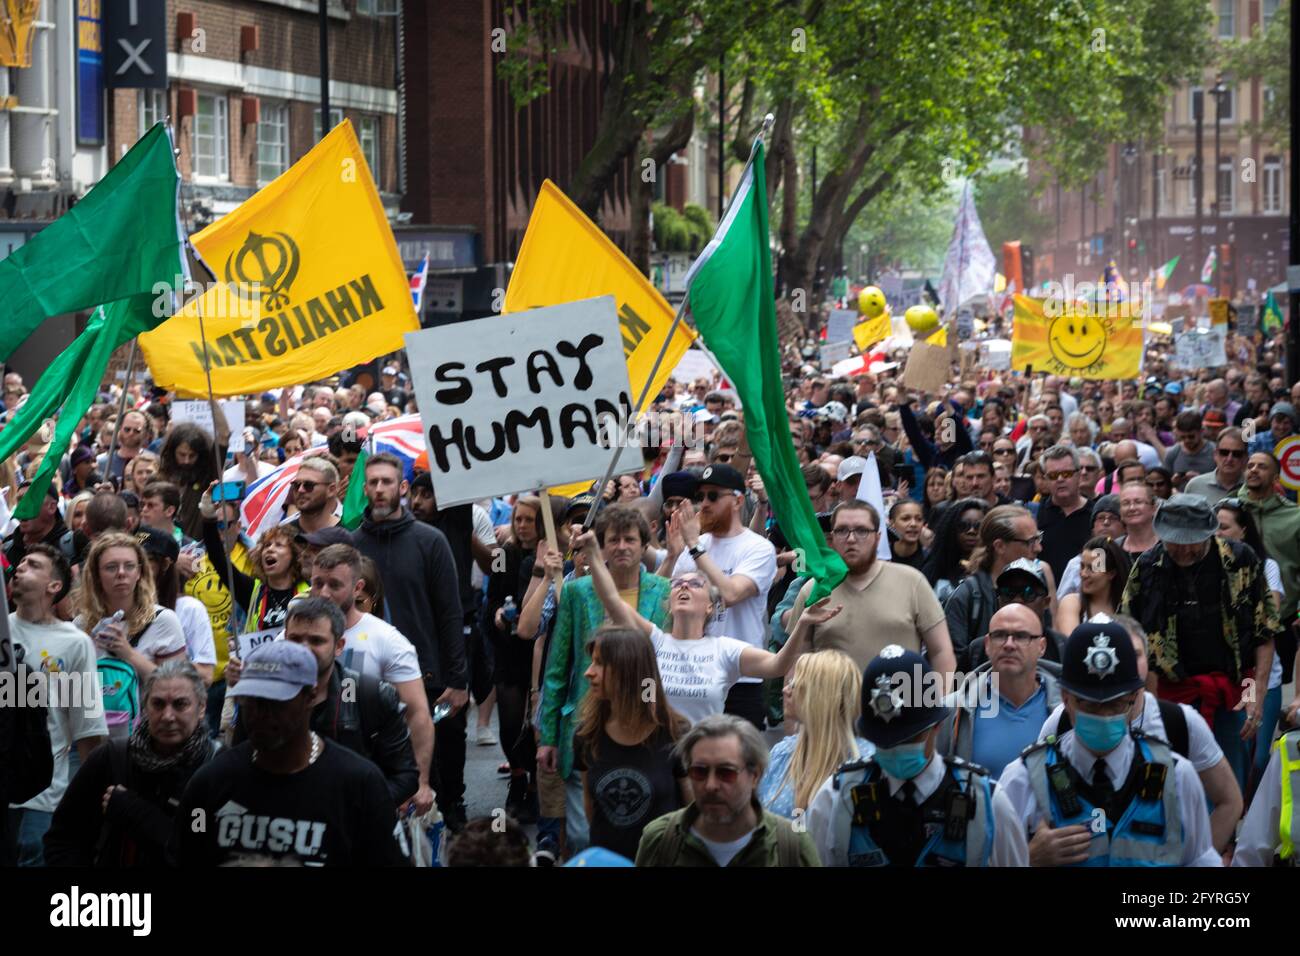 Manchester, UK. 29th May, 2021. Protesters march through the city during an anti-lockdown protest. The number of people attending the protests has increased month on month since the introduction of the COVID-19 restrictions. Credit: Andy Barton/Alamy Live News Stock Photo